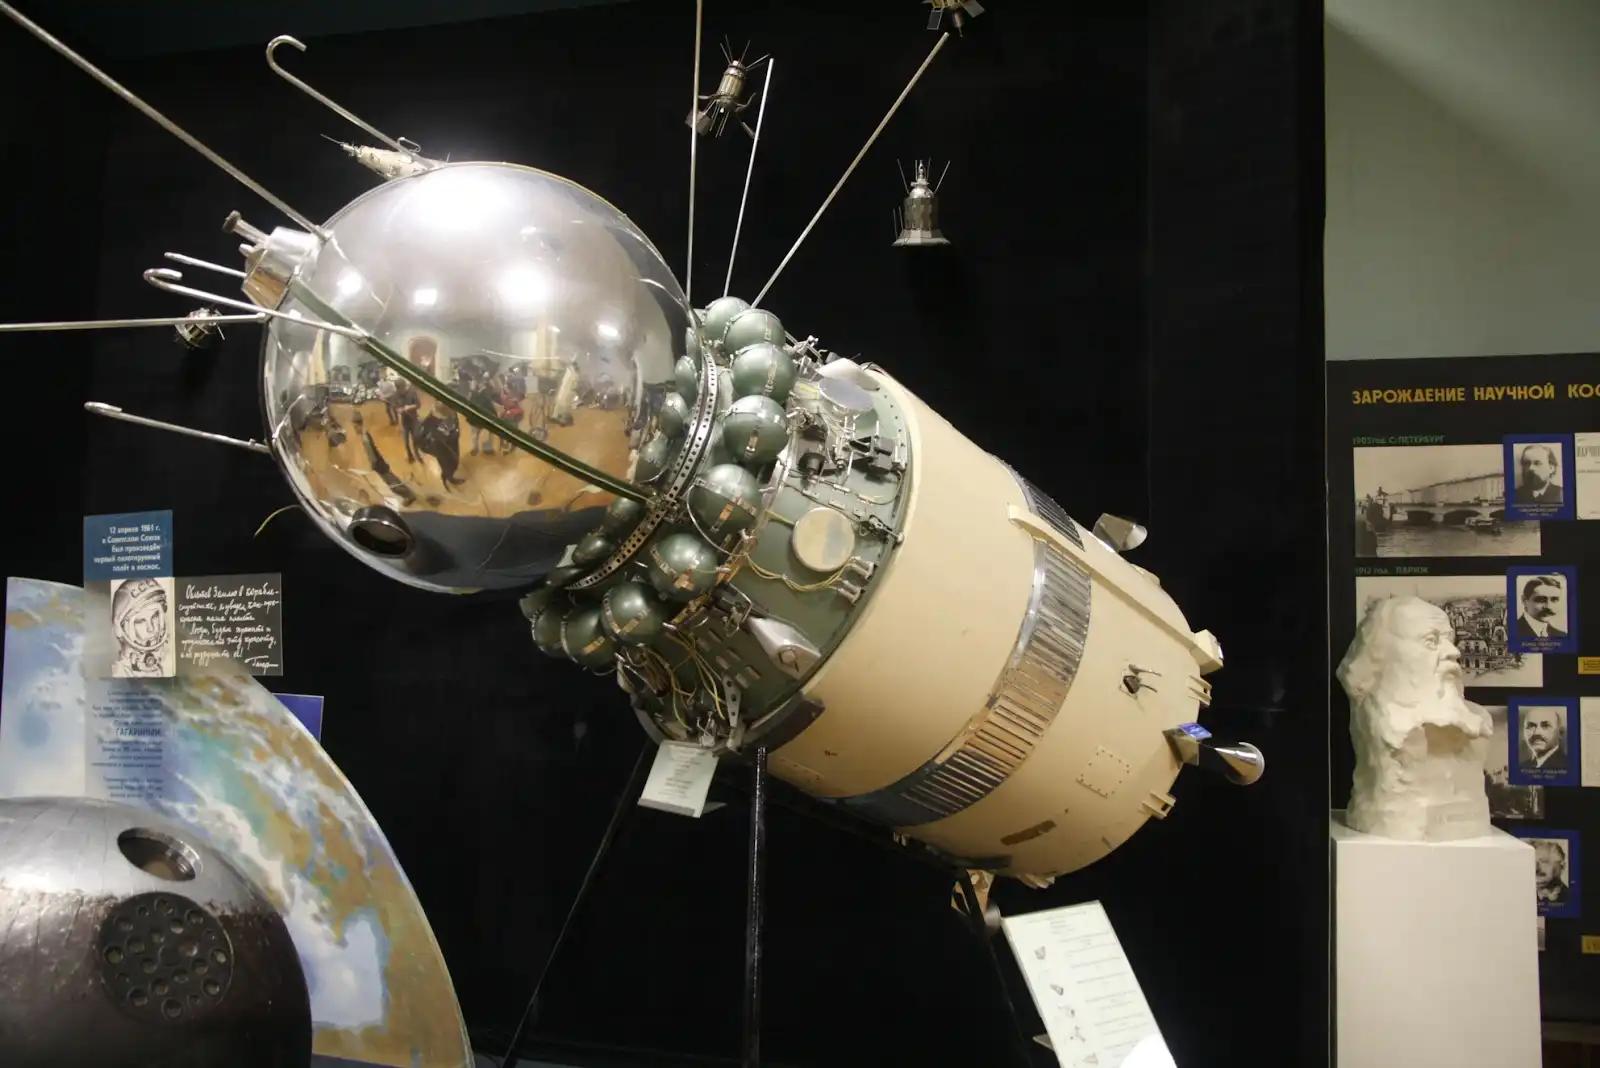 A picture of the Vostok spacecraft